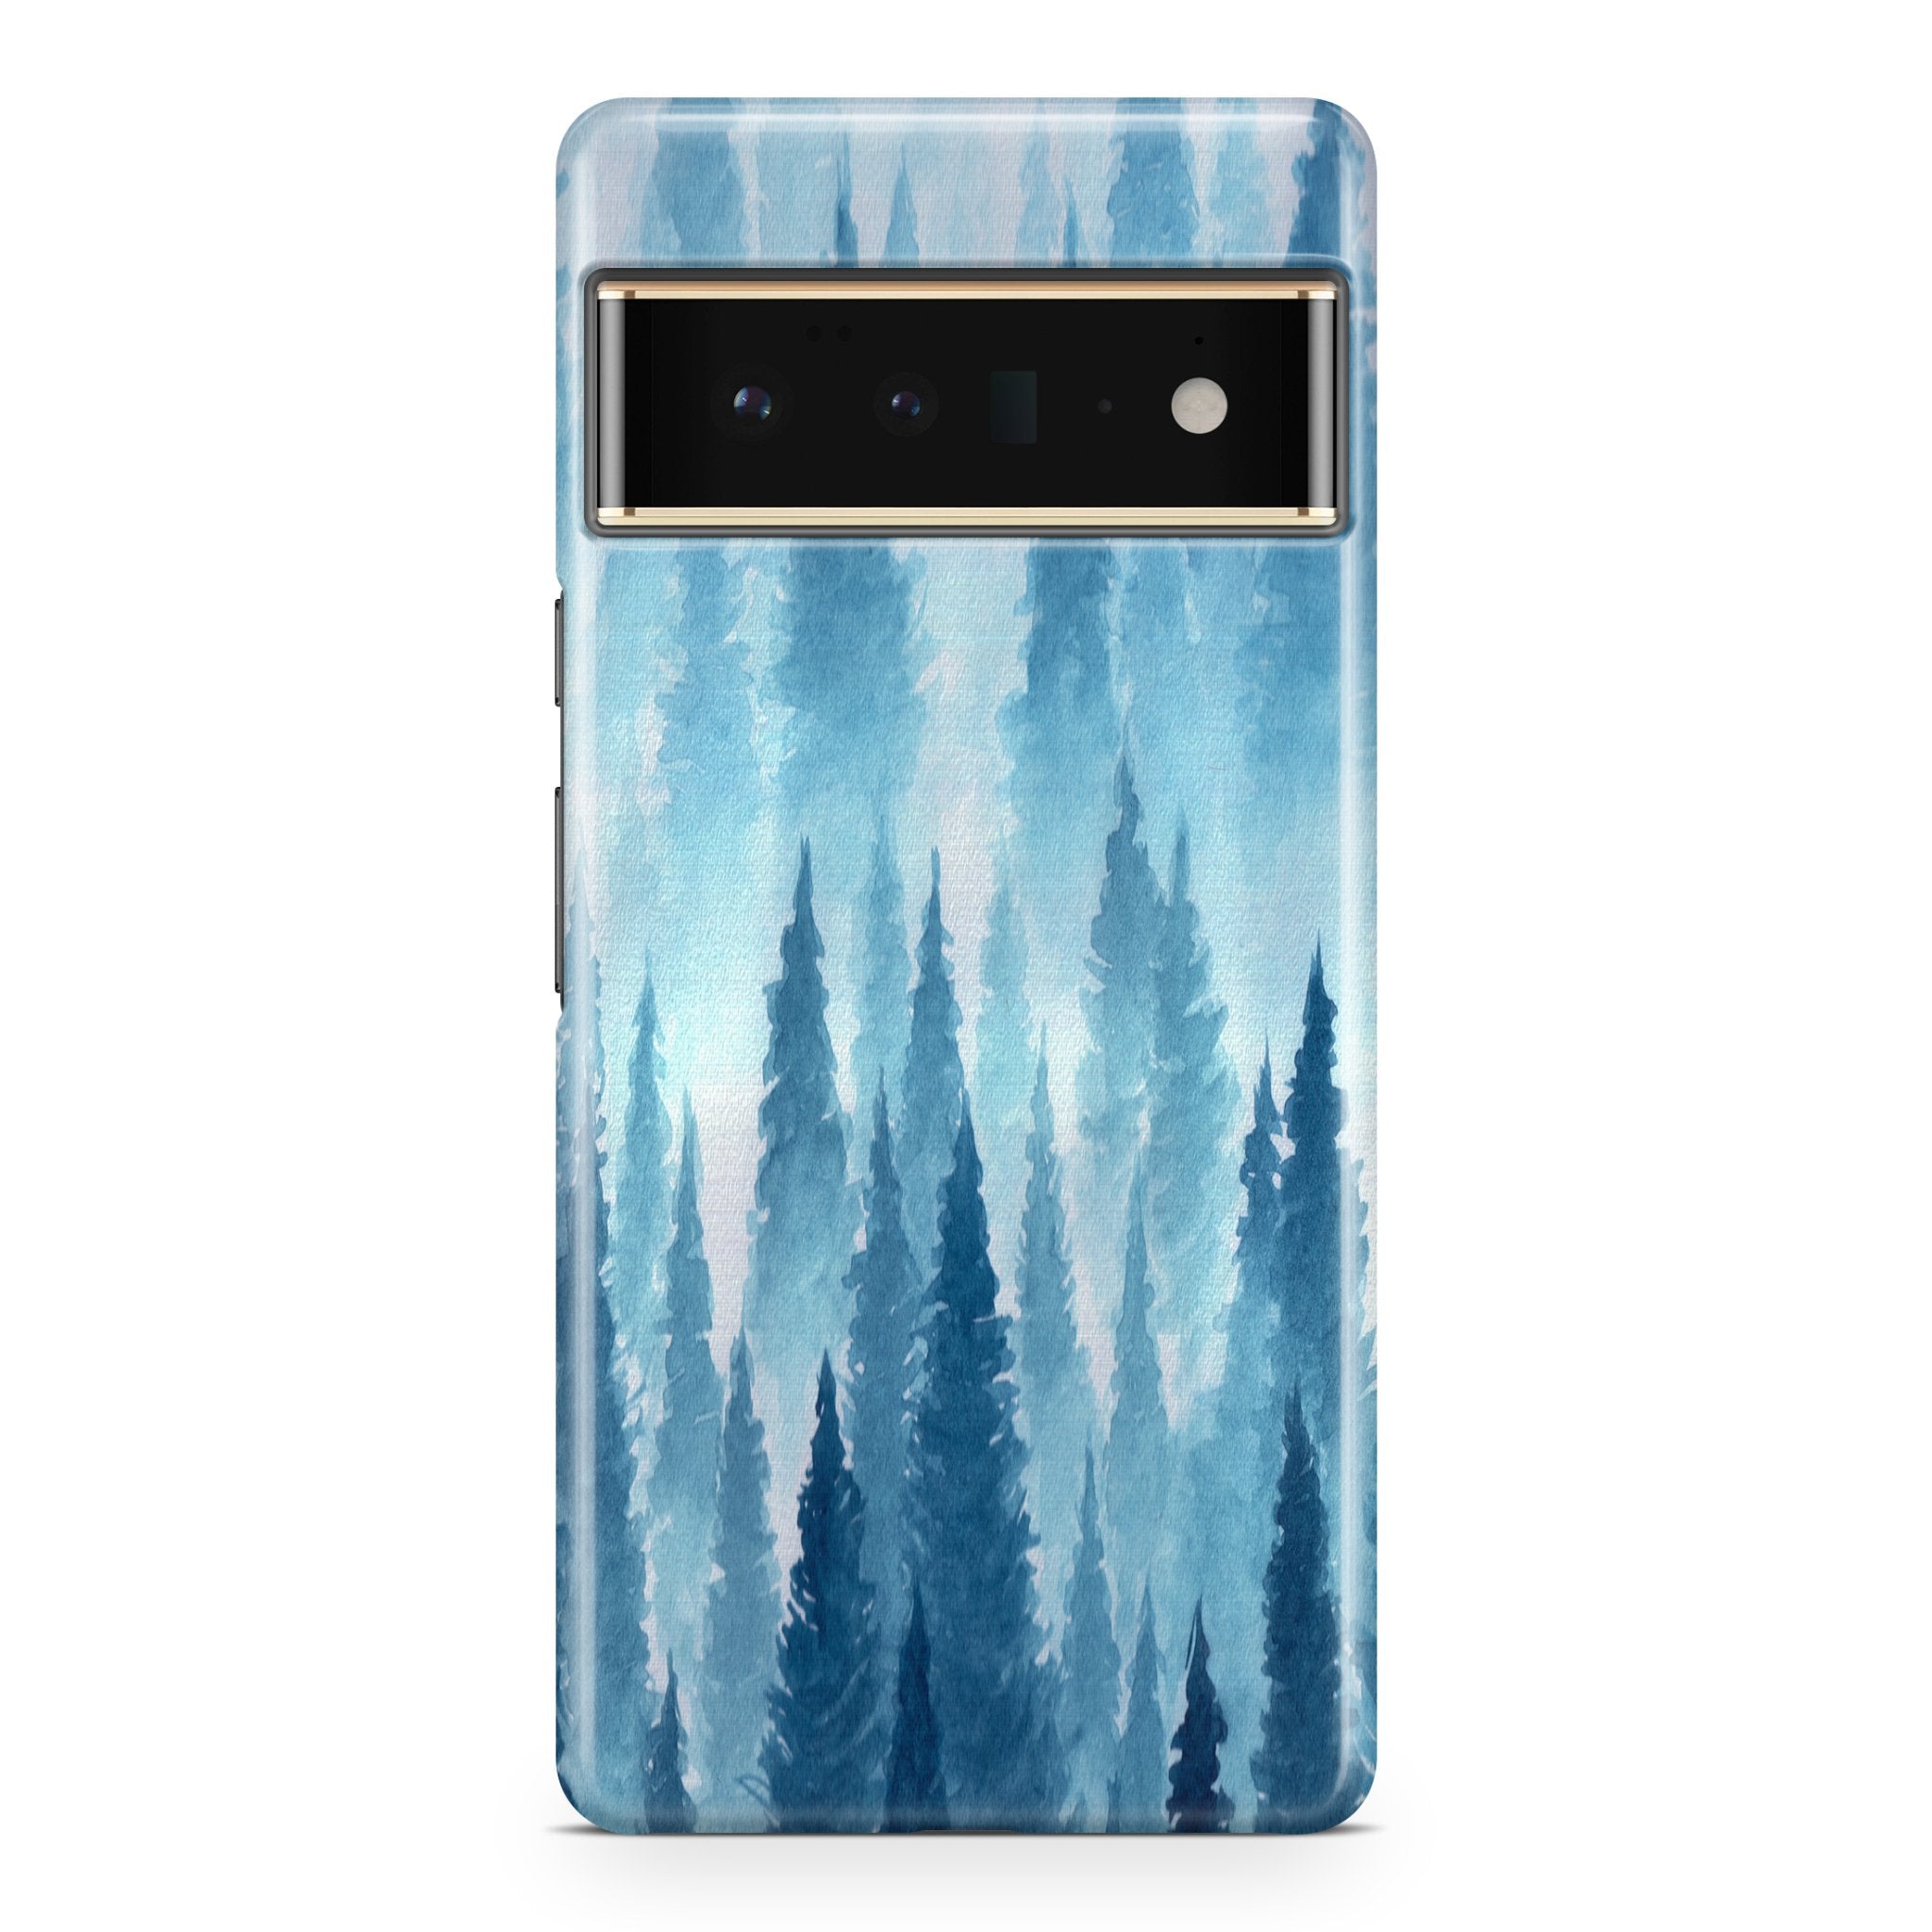 Blue Winter Forest - Google phone case designs by CaseSwagger